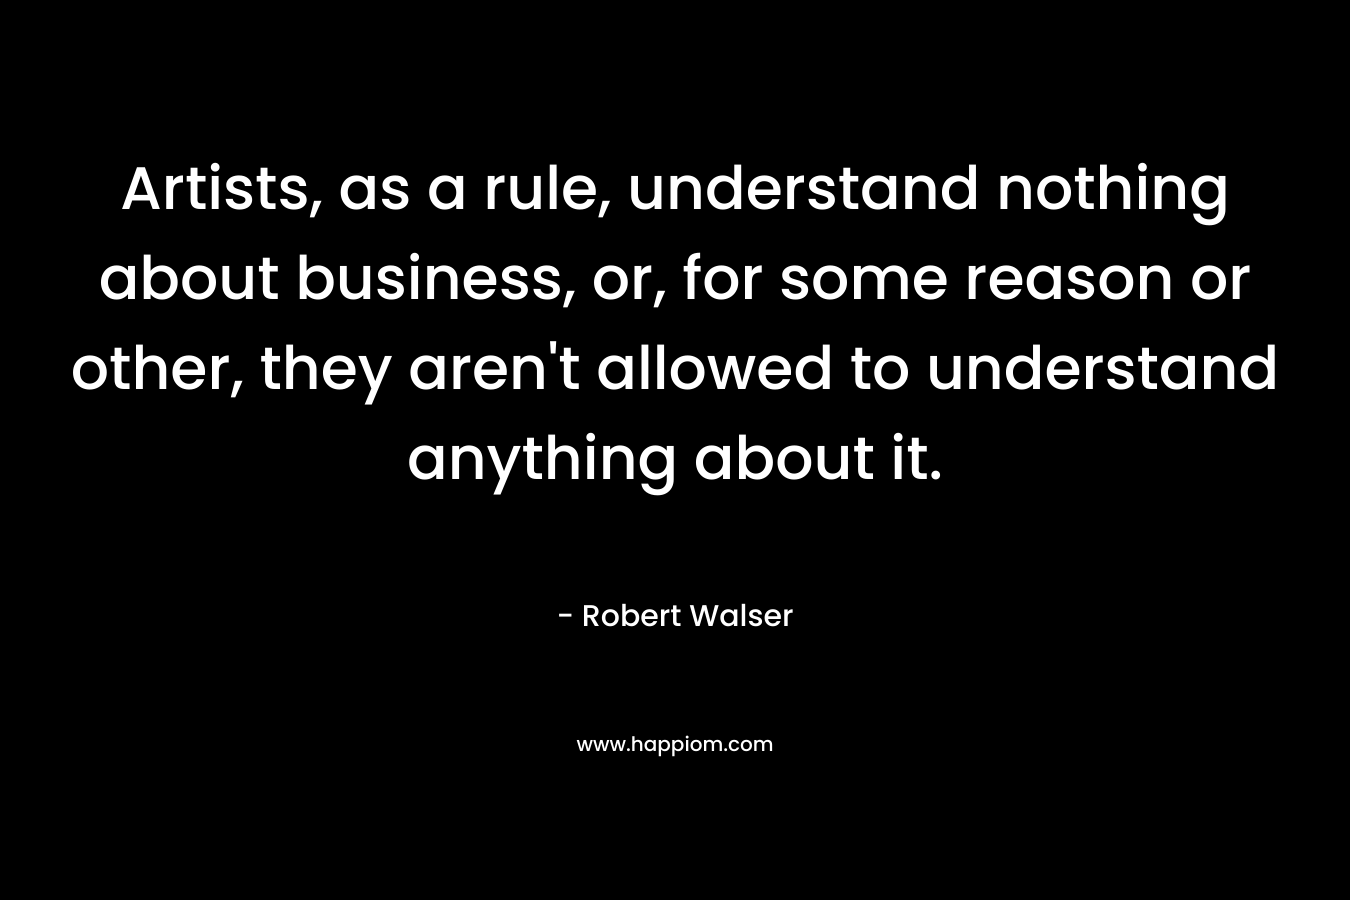 Artists, as a rule, understand nothing about business, or, for some reason or other, they aren't allowed to understand anything about it.